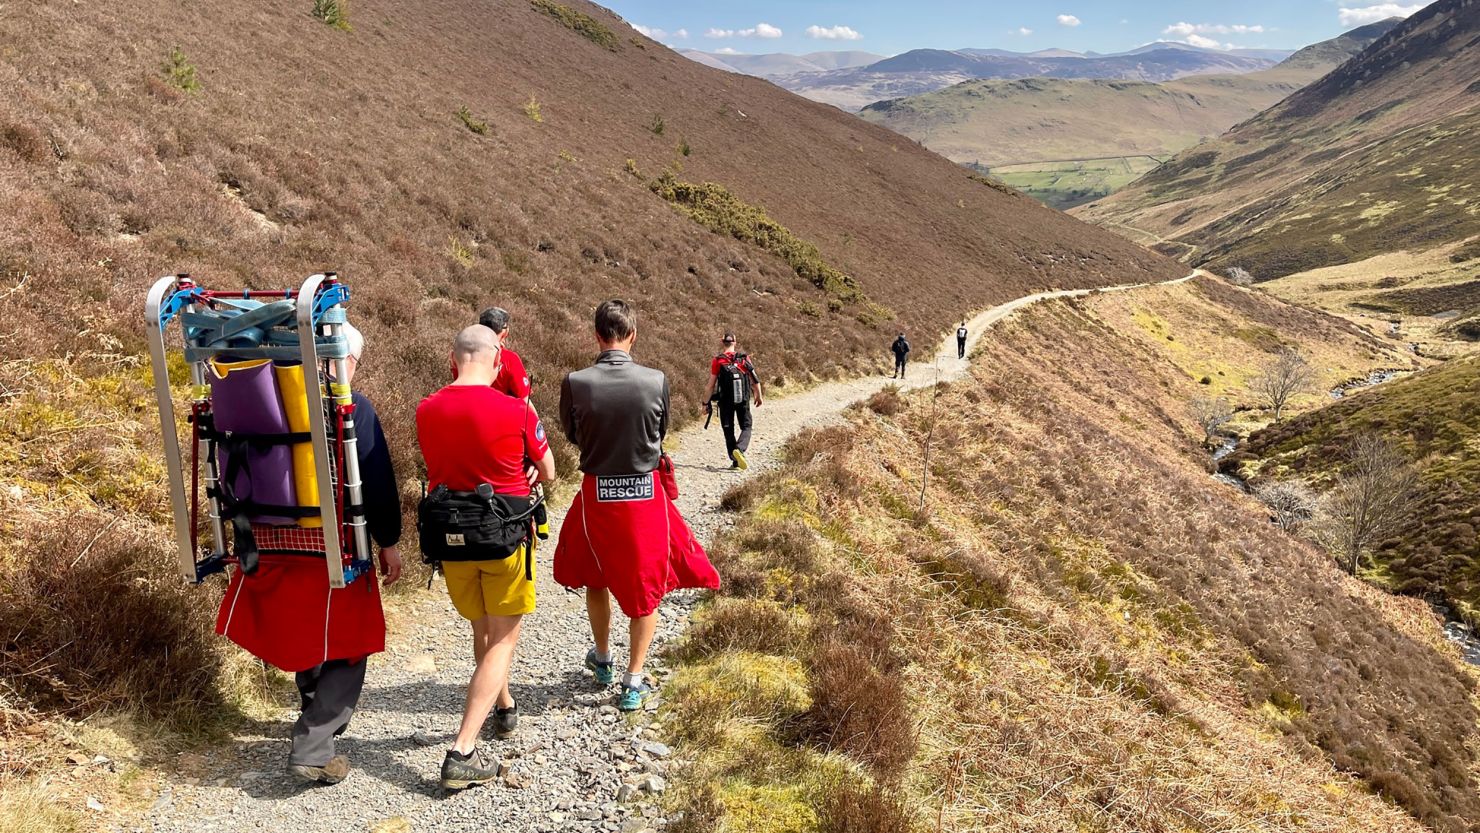 Volunteers from the Keswick Mountain Rescue Team spent two hours assisting a group of hikers in the Lake District, some of whom had become unwell after taking magic mushrooms, according to the group's Facebook page.